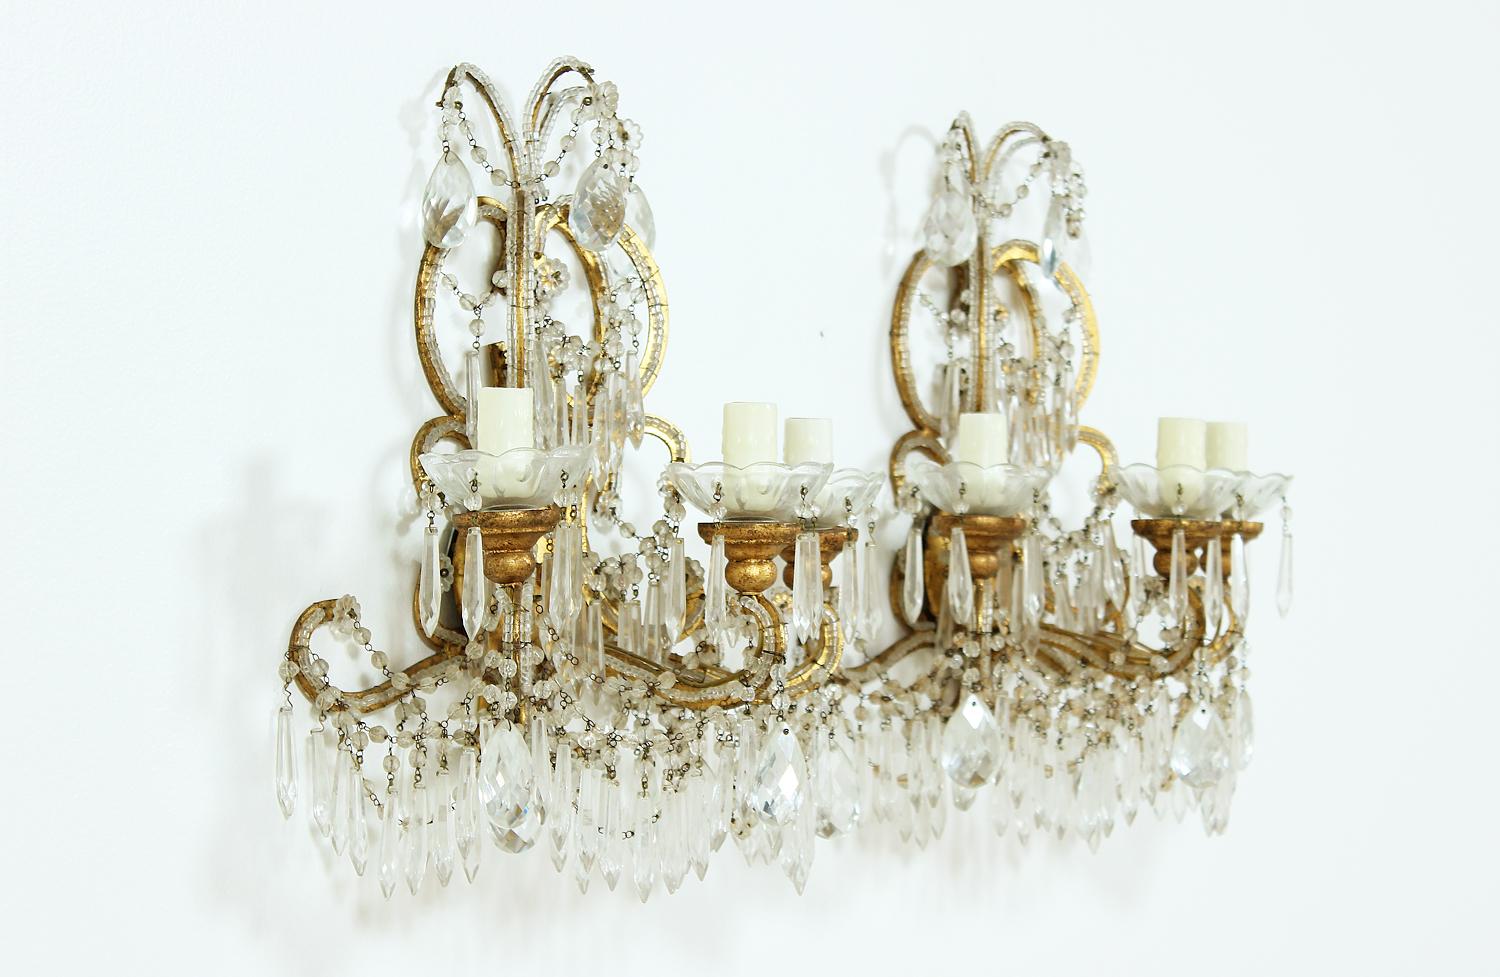 Beautiful pair of 1920s Italian crystal beaded sconces featuring gilt iron frames embellished with crystal beads, swags and prisms. Original wiring is in working condition. Each sconce requires two candelabra base bulbs. New bee wax candle sleeves.